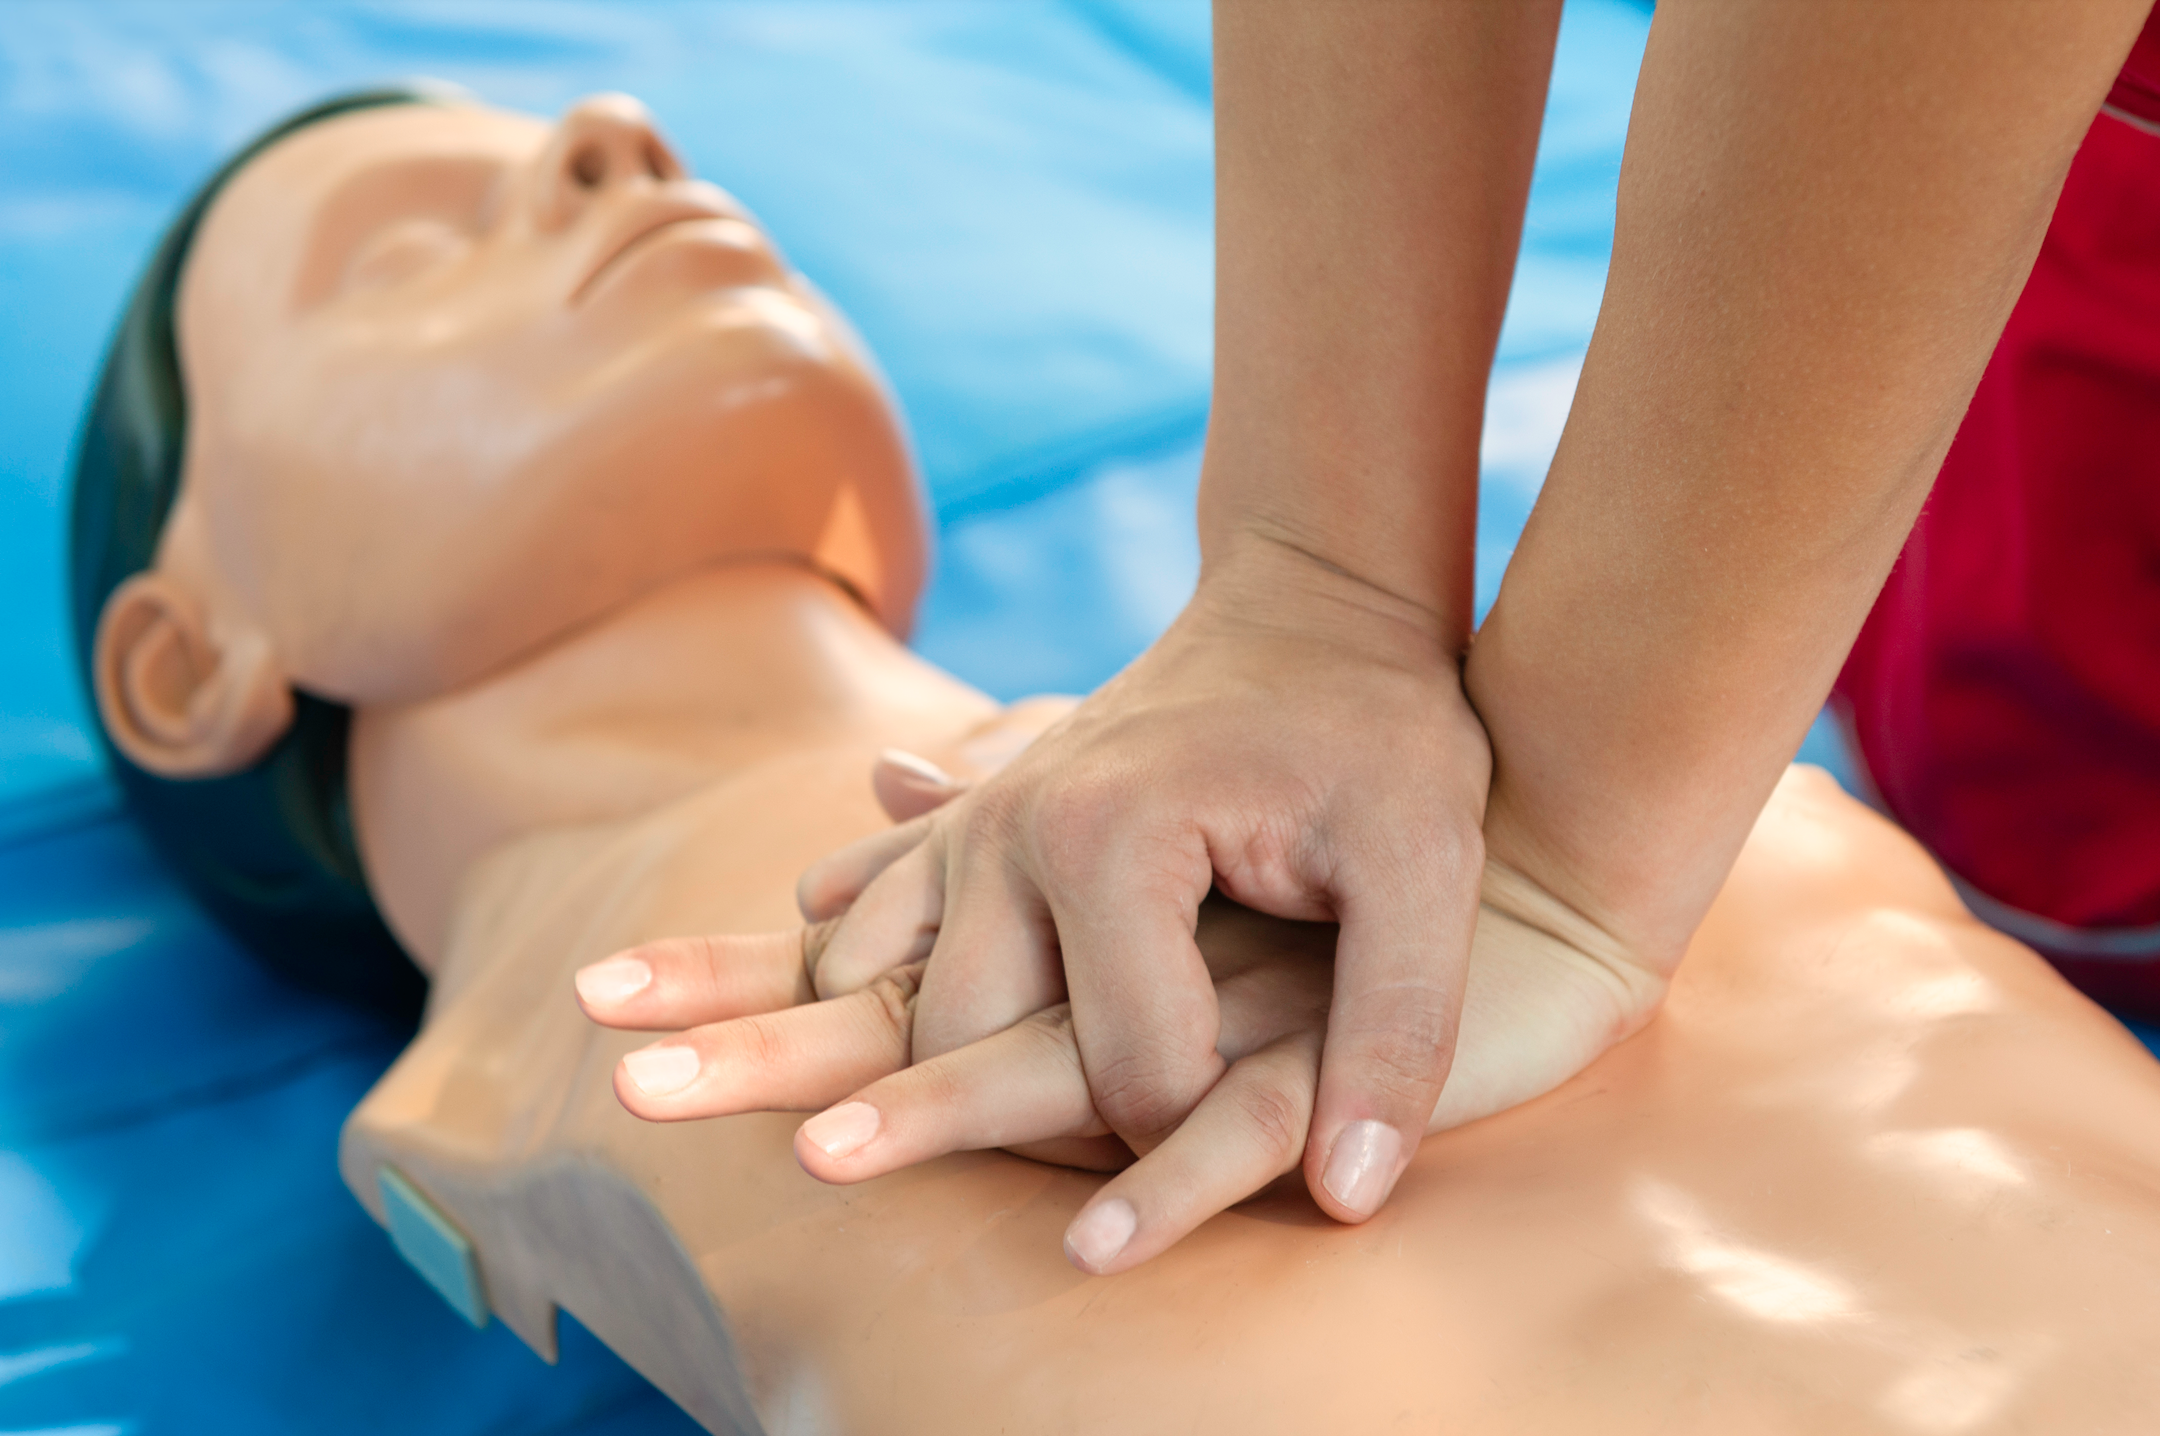 It's Time to Make BLS and CPR Training Affordable to All